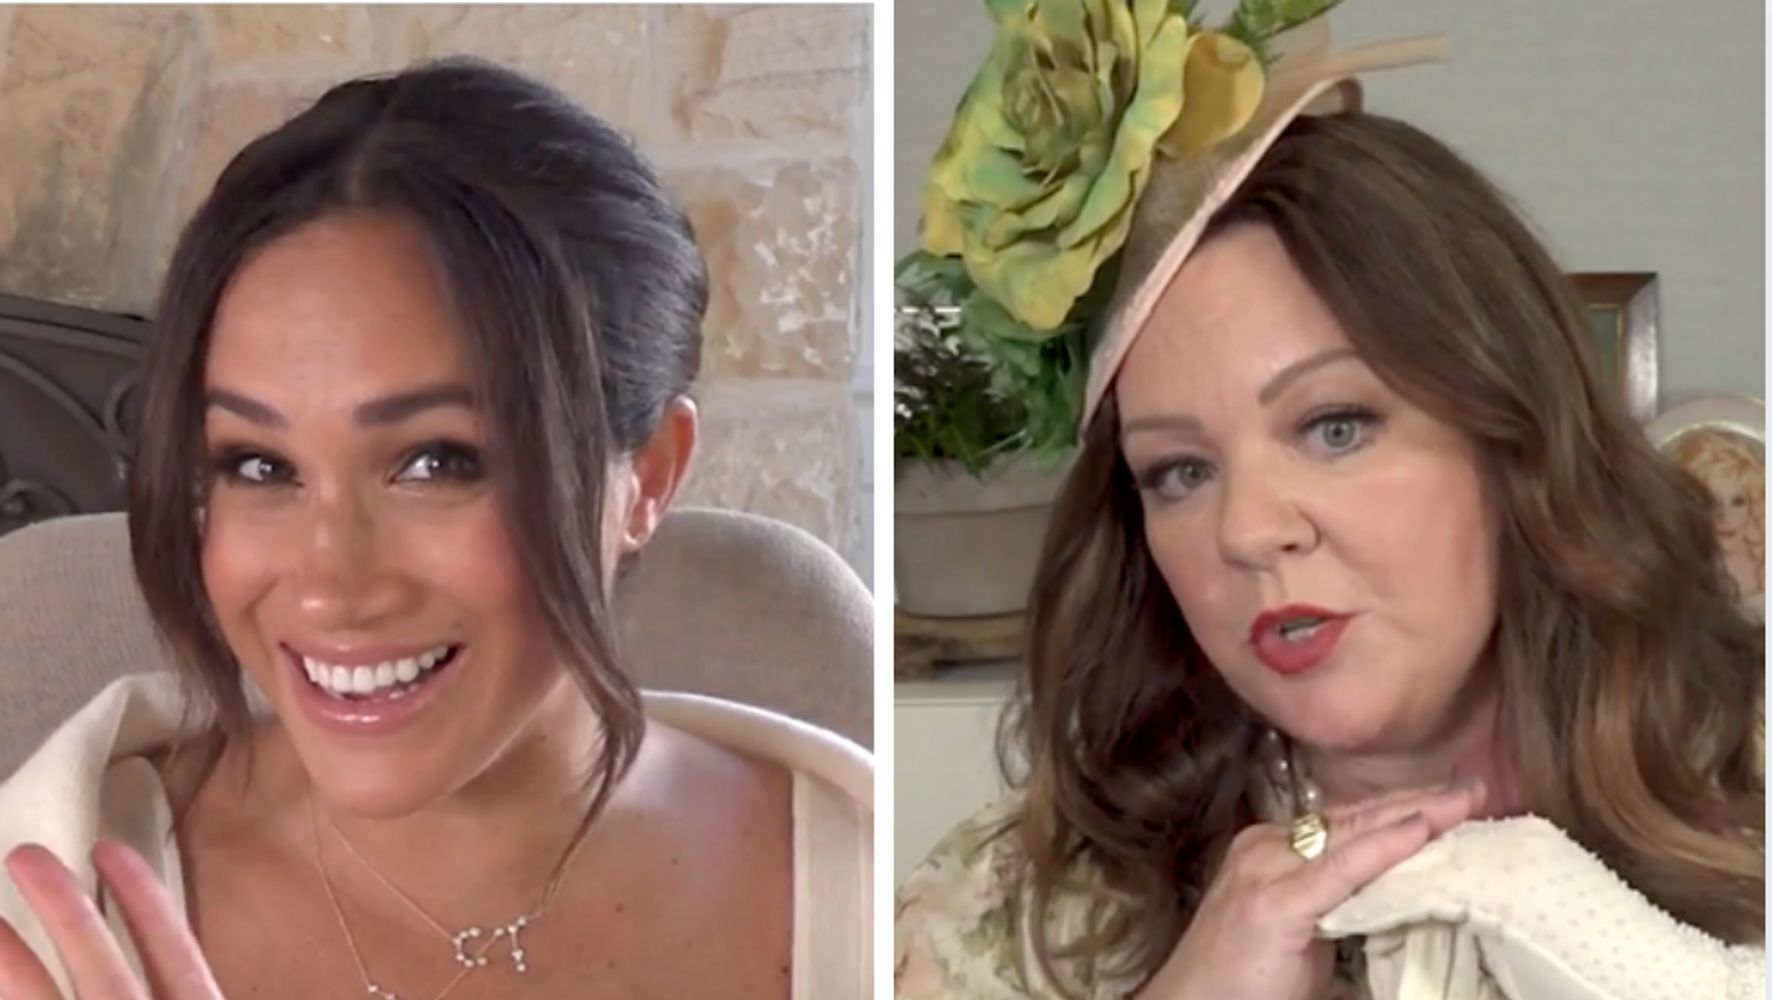 Meghan Markle Celebrates 40th Birthday In Hilarious Video With 'Bestie' Melissa McCarthy